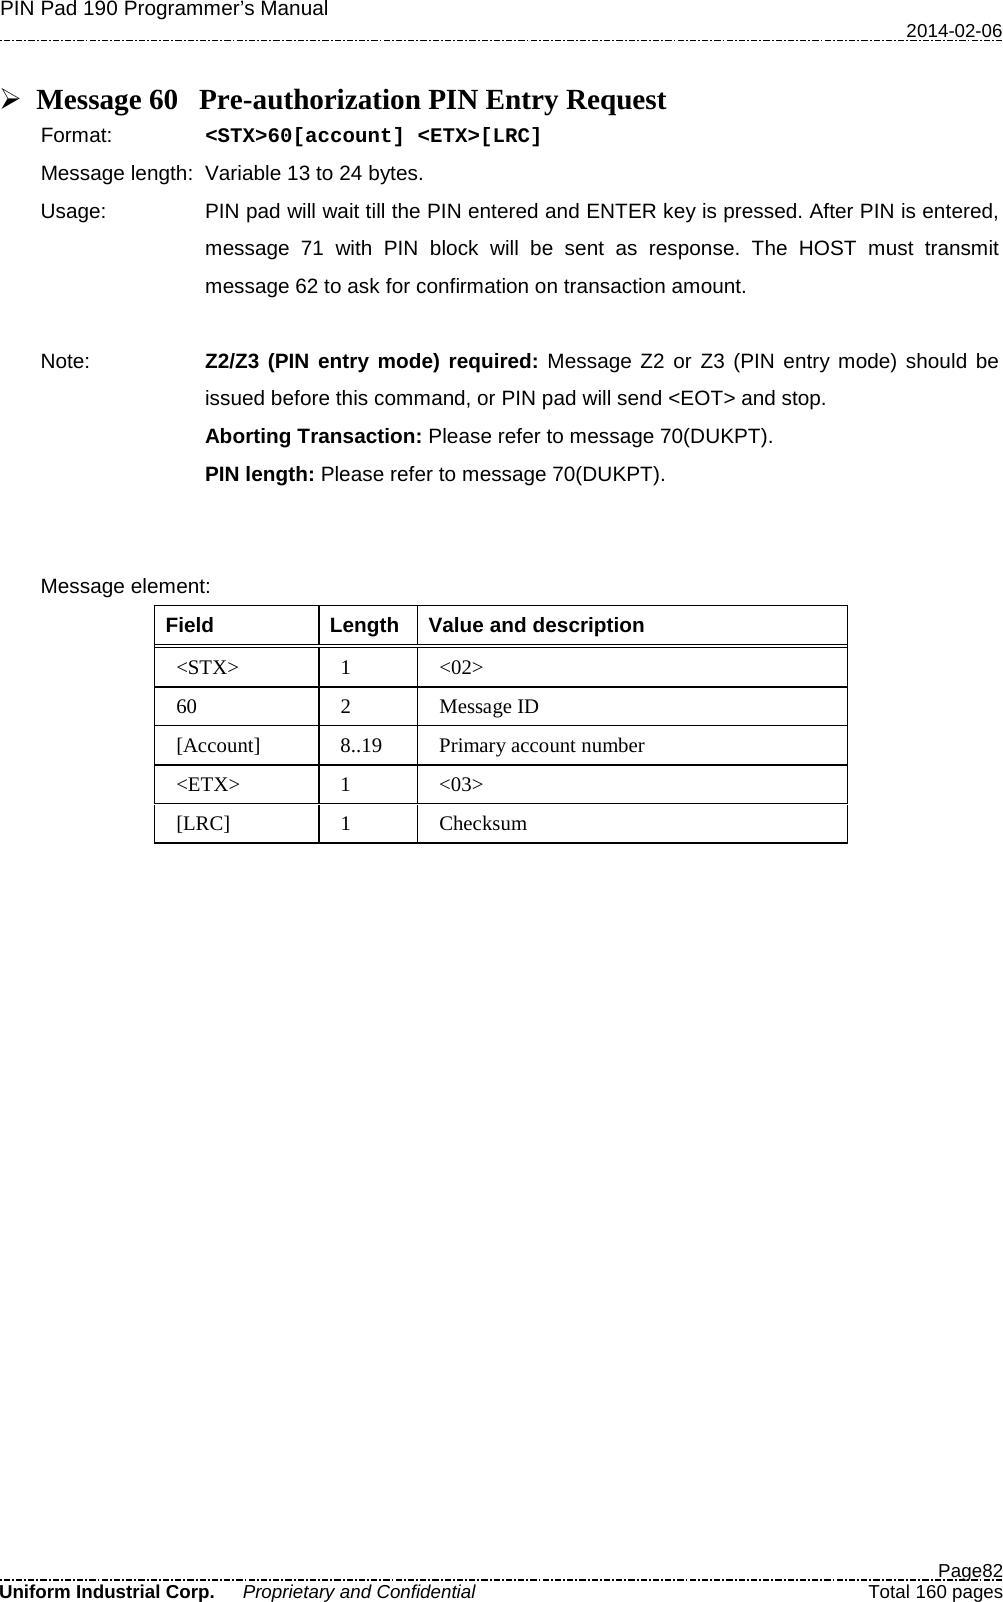 PIN Pad 190 Programmer’s Manual   2014-02-06  Page82 Uniform Industrial Corp. Proprietary and Confidential  Total 160 pages   Message 60 Pre-authorization PIN Entry Request Format:   &lt;STX&gt;60[account] &lt;ETX&gt;[LRC] Message length: Variable 13 to 24 bytes. Usage: PIN pad will wait till the PIN entered and ENTER key is pressed. After PIN is entered, message 71 with PIN block will be sent as response. The HOST must transmit message 62 to ask for confirmation on transaction amount.  Note: Z2/Z3 (PIN entry mode) required: Message Z2 or Z3 (PIN entry mode) should be issued before this command, or PIN pad will send &lt;EOT&gt; and stop. Aborting Transaction: Please refer to message 70(DUKPT). PIN length: Please refer to message 70(DUKPT).     Message element:   Field  Length  Value and description &lt;STX&gt;  1  &lt;02&gt; 60  2  Message ID [Account] 8..19 Primary account number &lt;ETX&gt;  1  &lt;03&gt; [LRC]  1  Checksum  